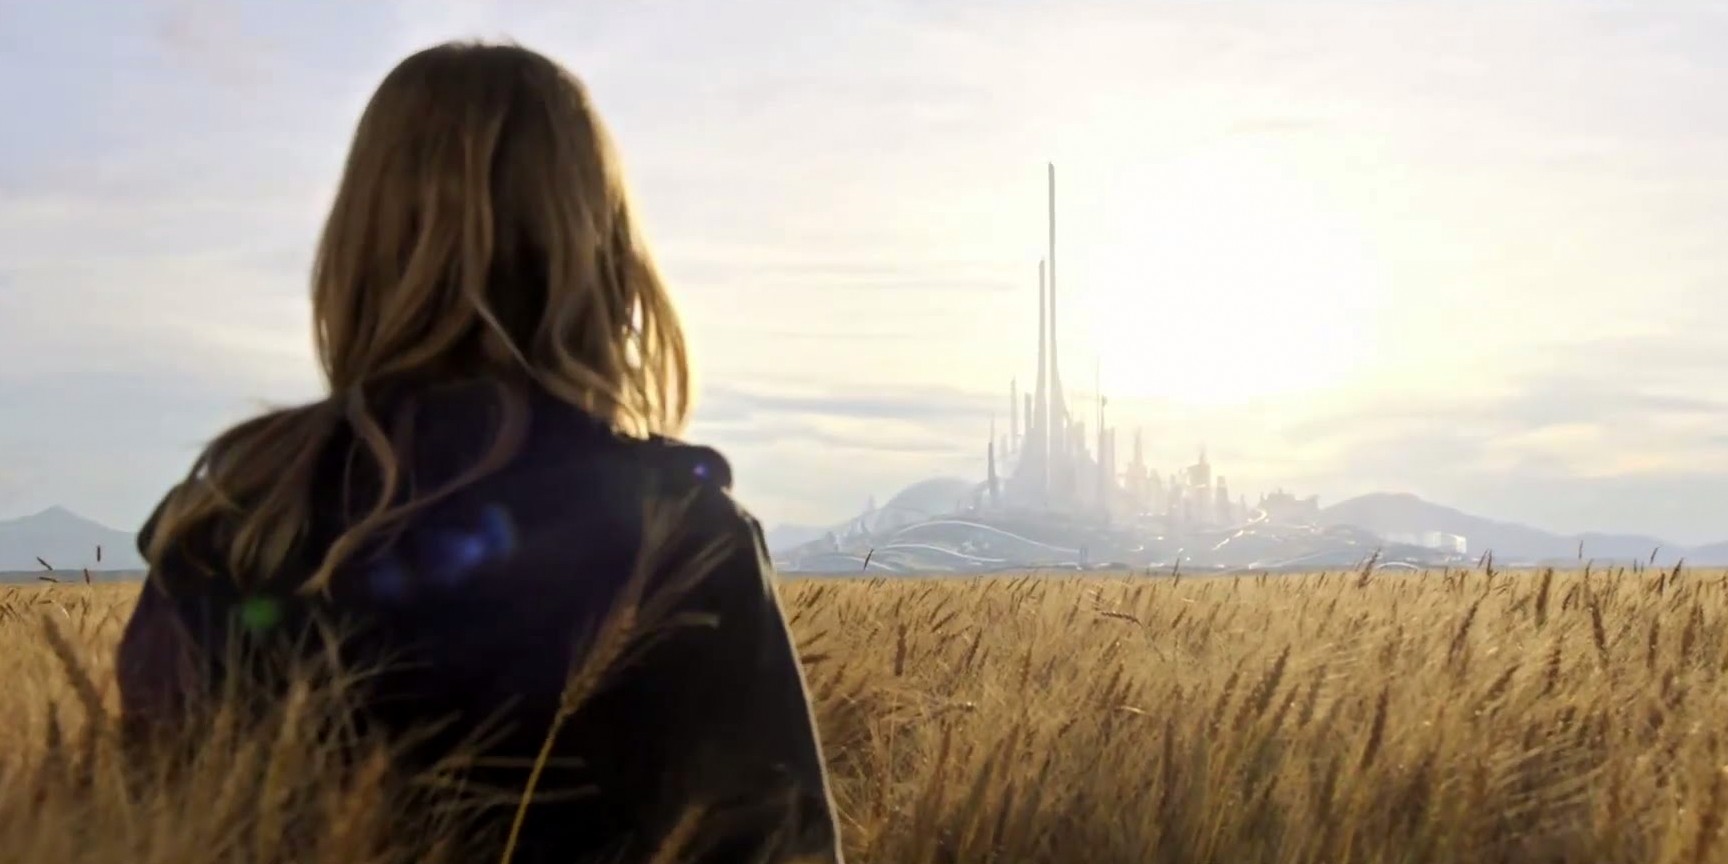 Tomorrowland - Frank George Clooney and Casey Britt Robertson travel to place known as Tomorrowland, somewhere in time and space where their actions directly affect the world and themselves. Release date: May 22nd